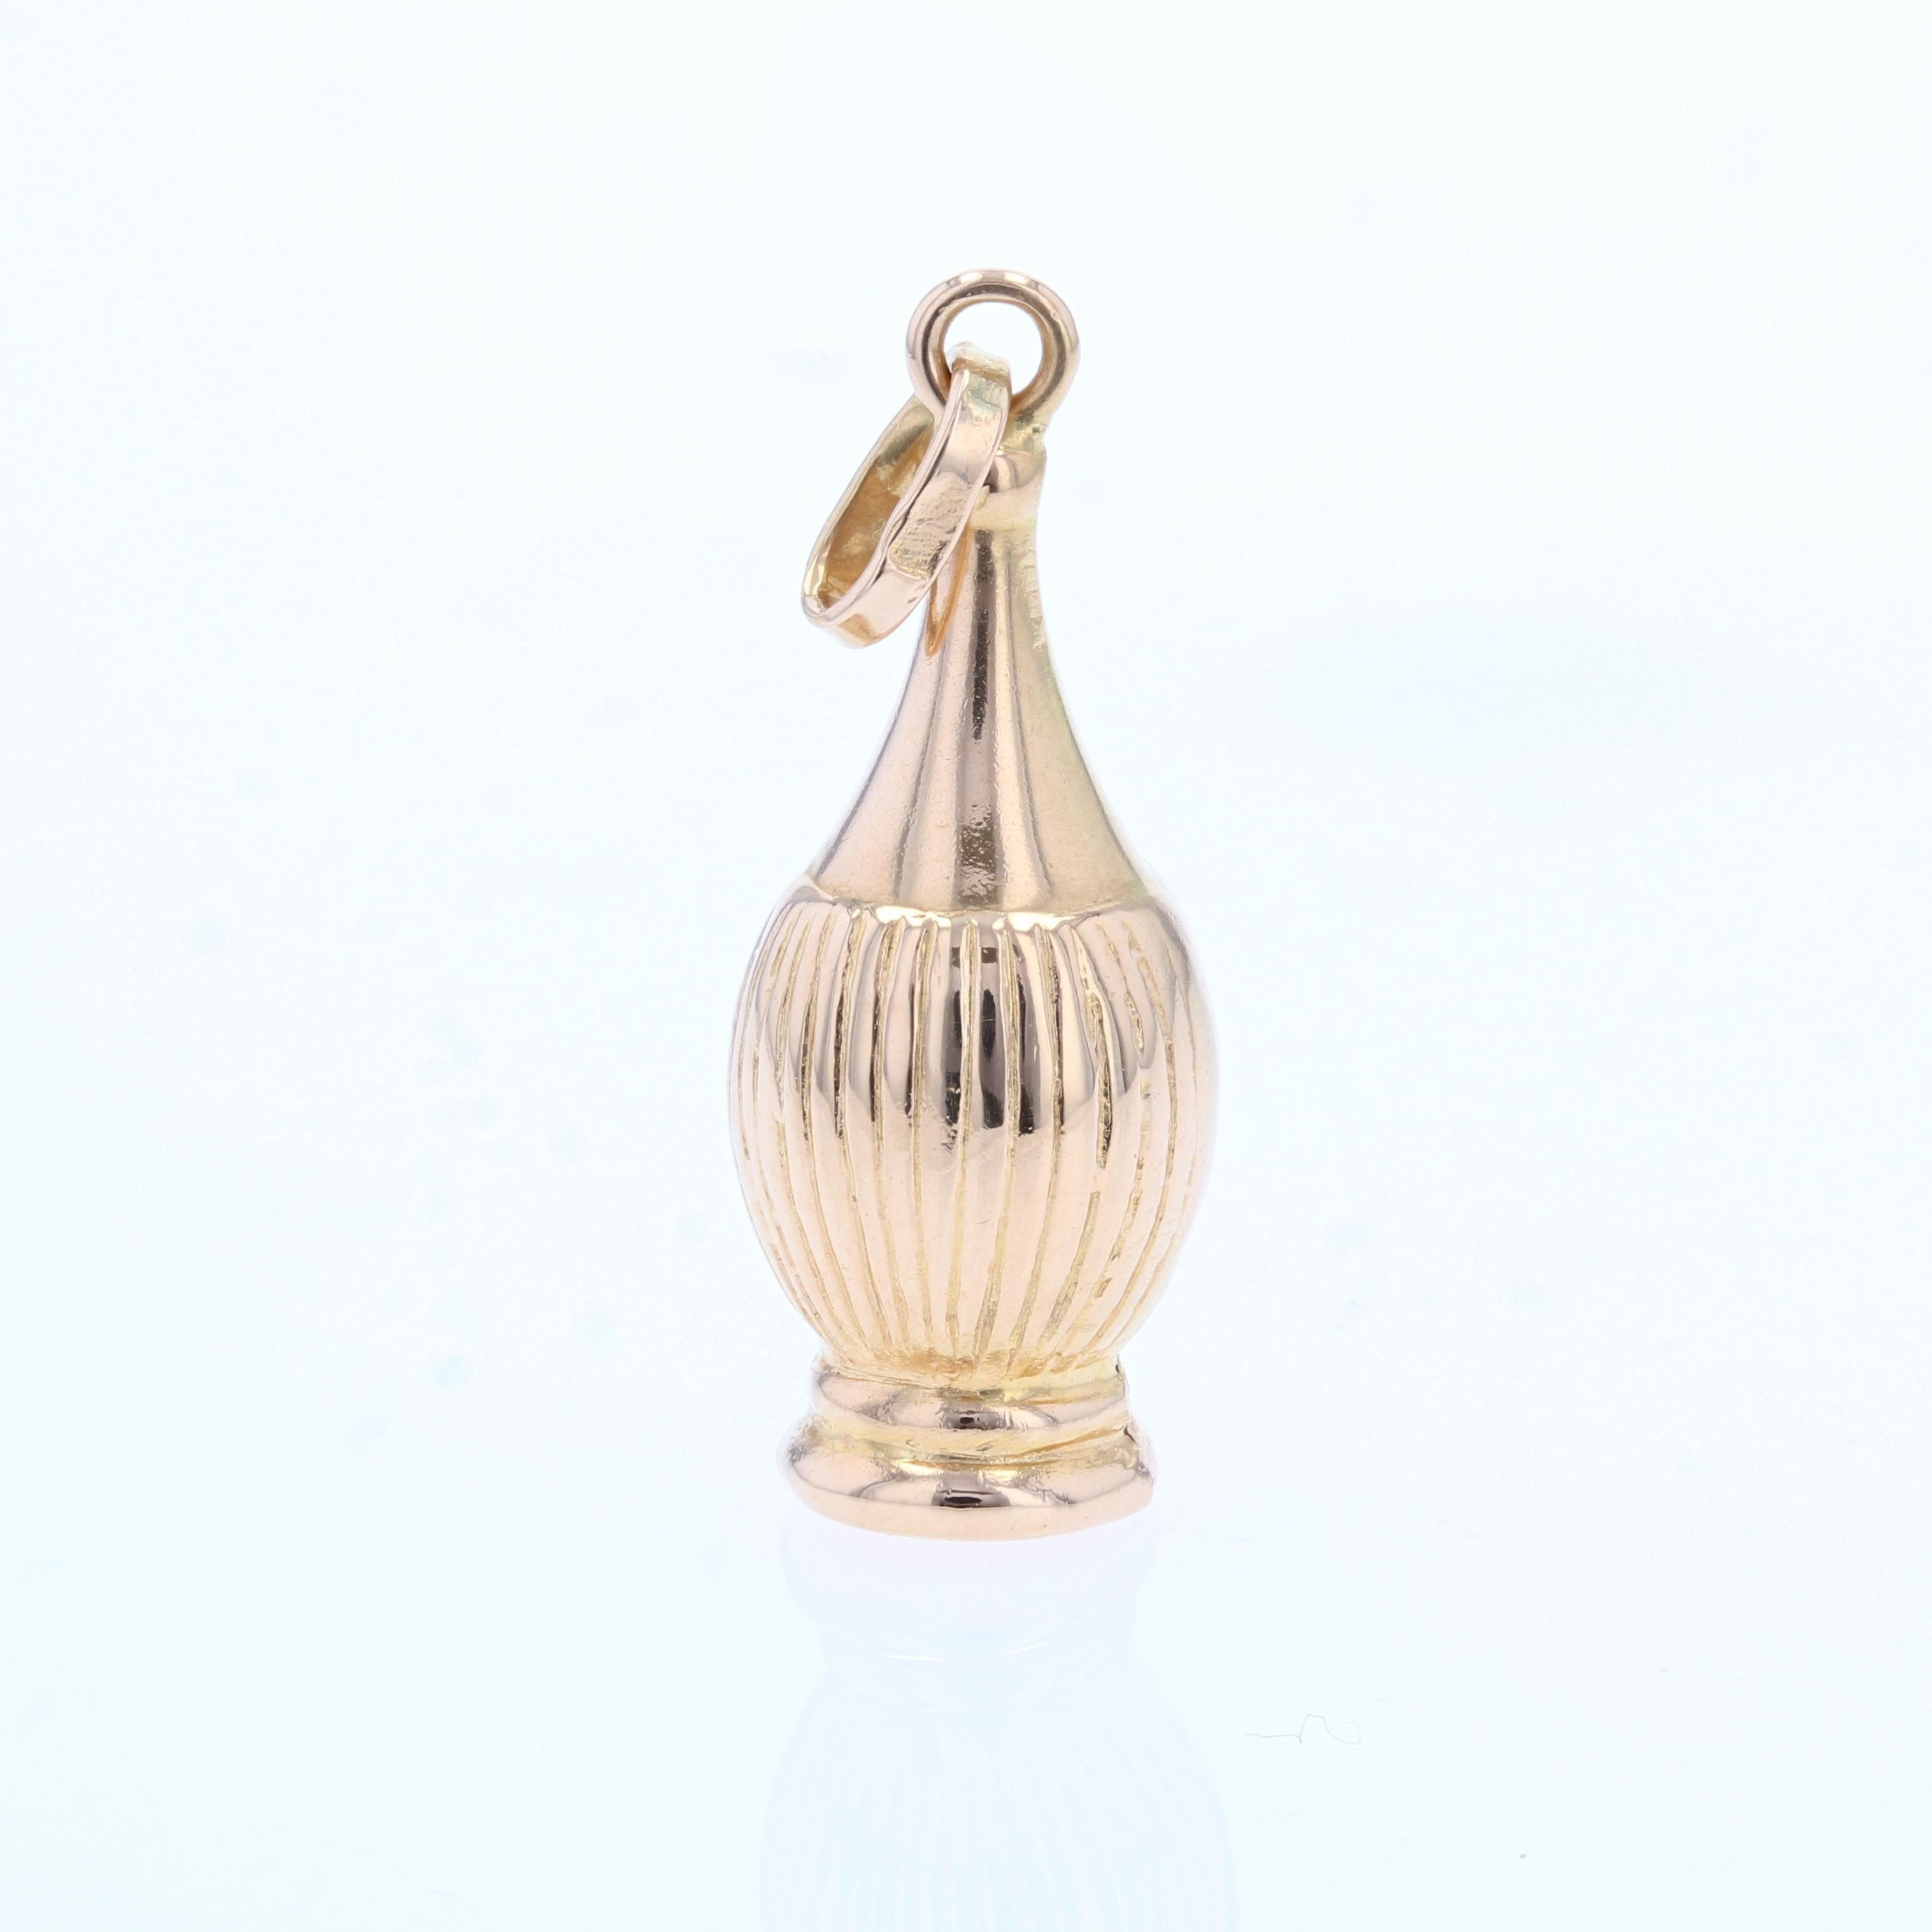 Pendant in 18 karat yellow gold.
Original retro charm, it represents a chiseled bottle.
Height : 3 cm, width : 9,5 mm, thickness : 9,5 mm approximately.
Total weight of the jewel : 1,8 g approximately.
Authentic antique jewel - Work of the